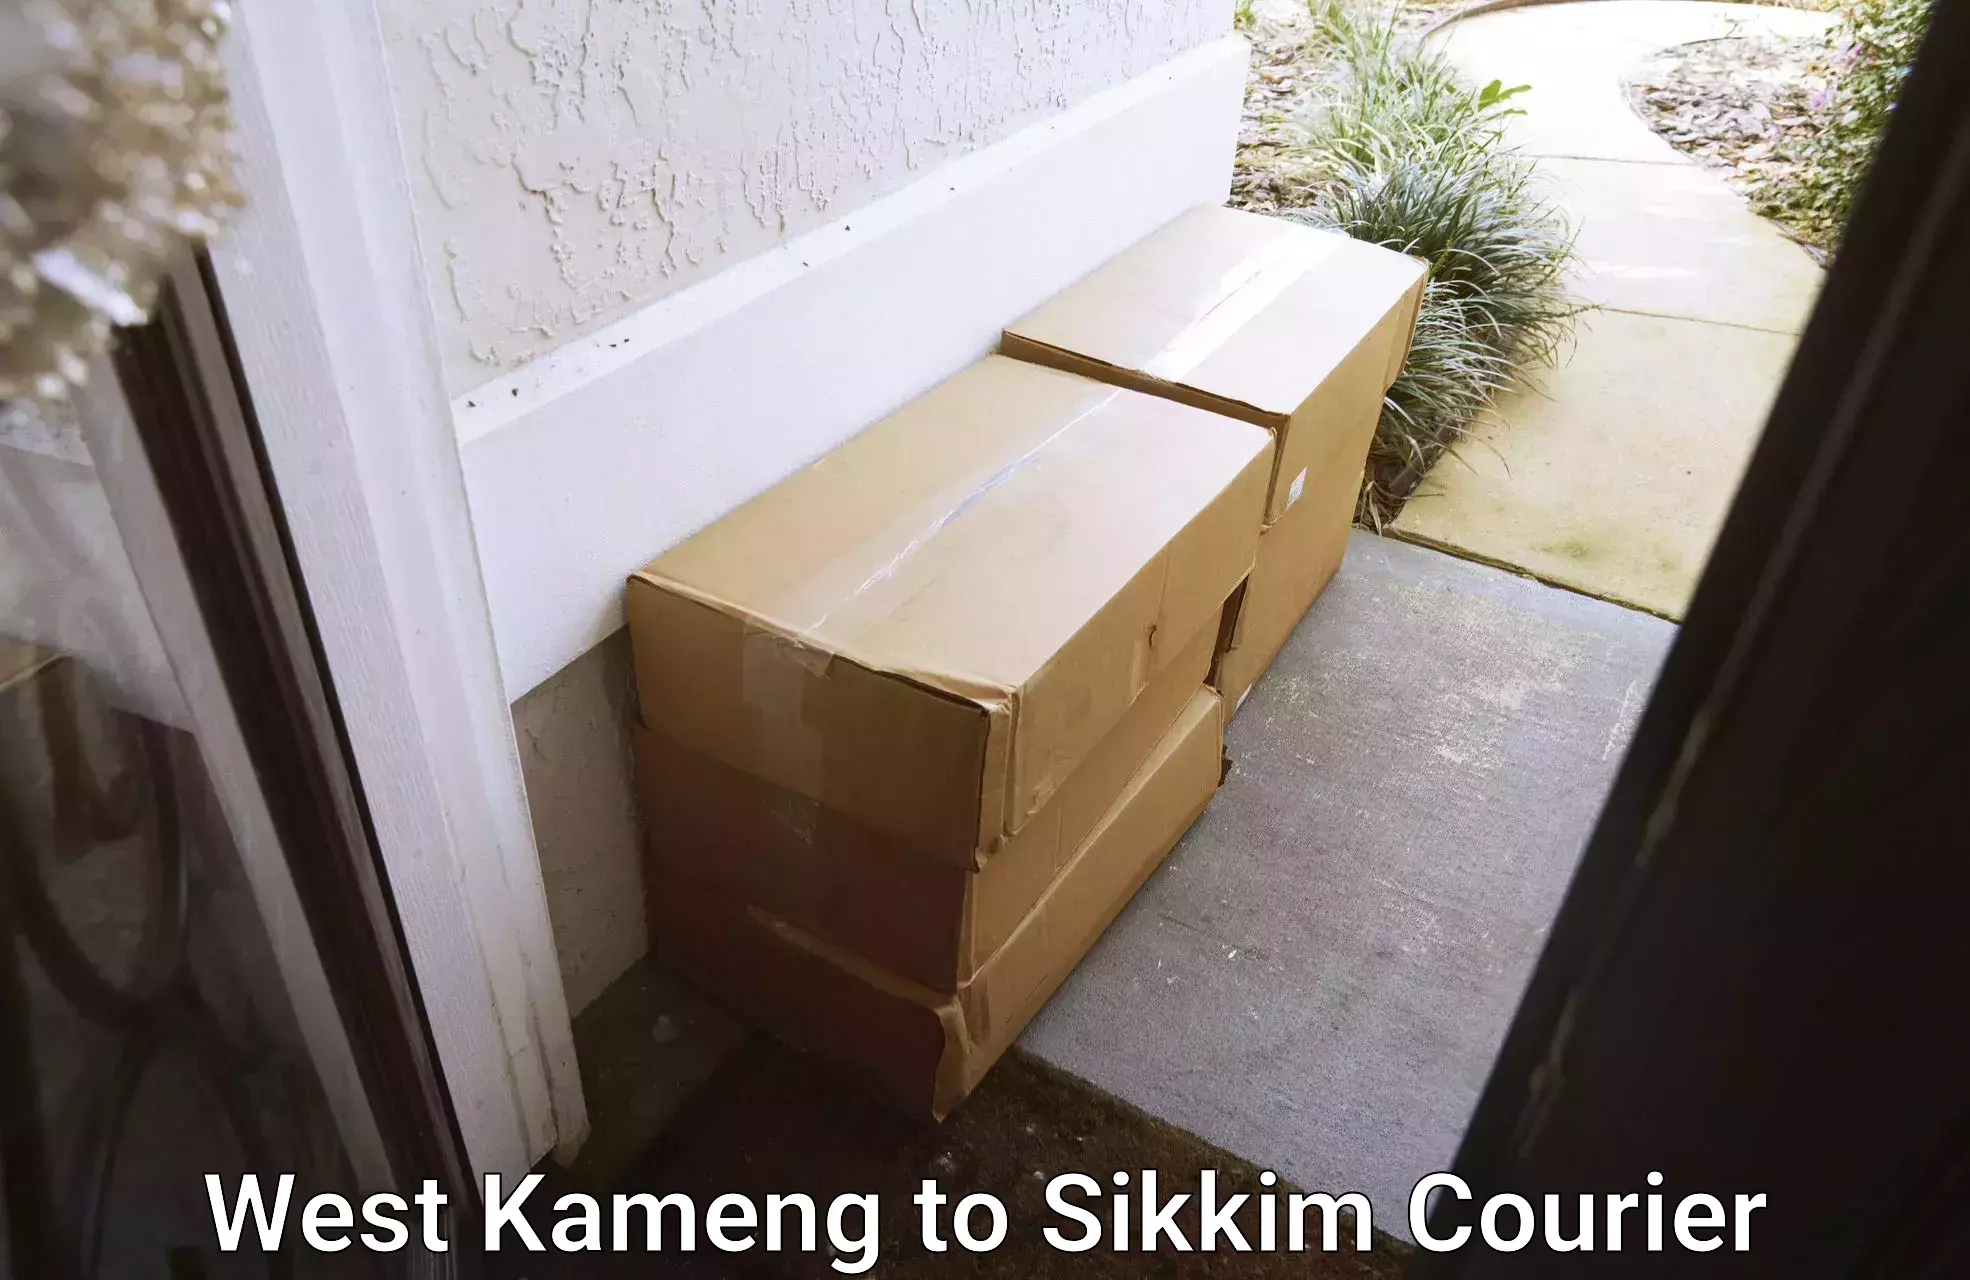 Courier service partnerships West Kameng to East Sikkim